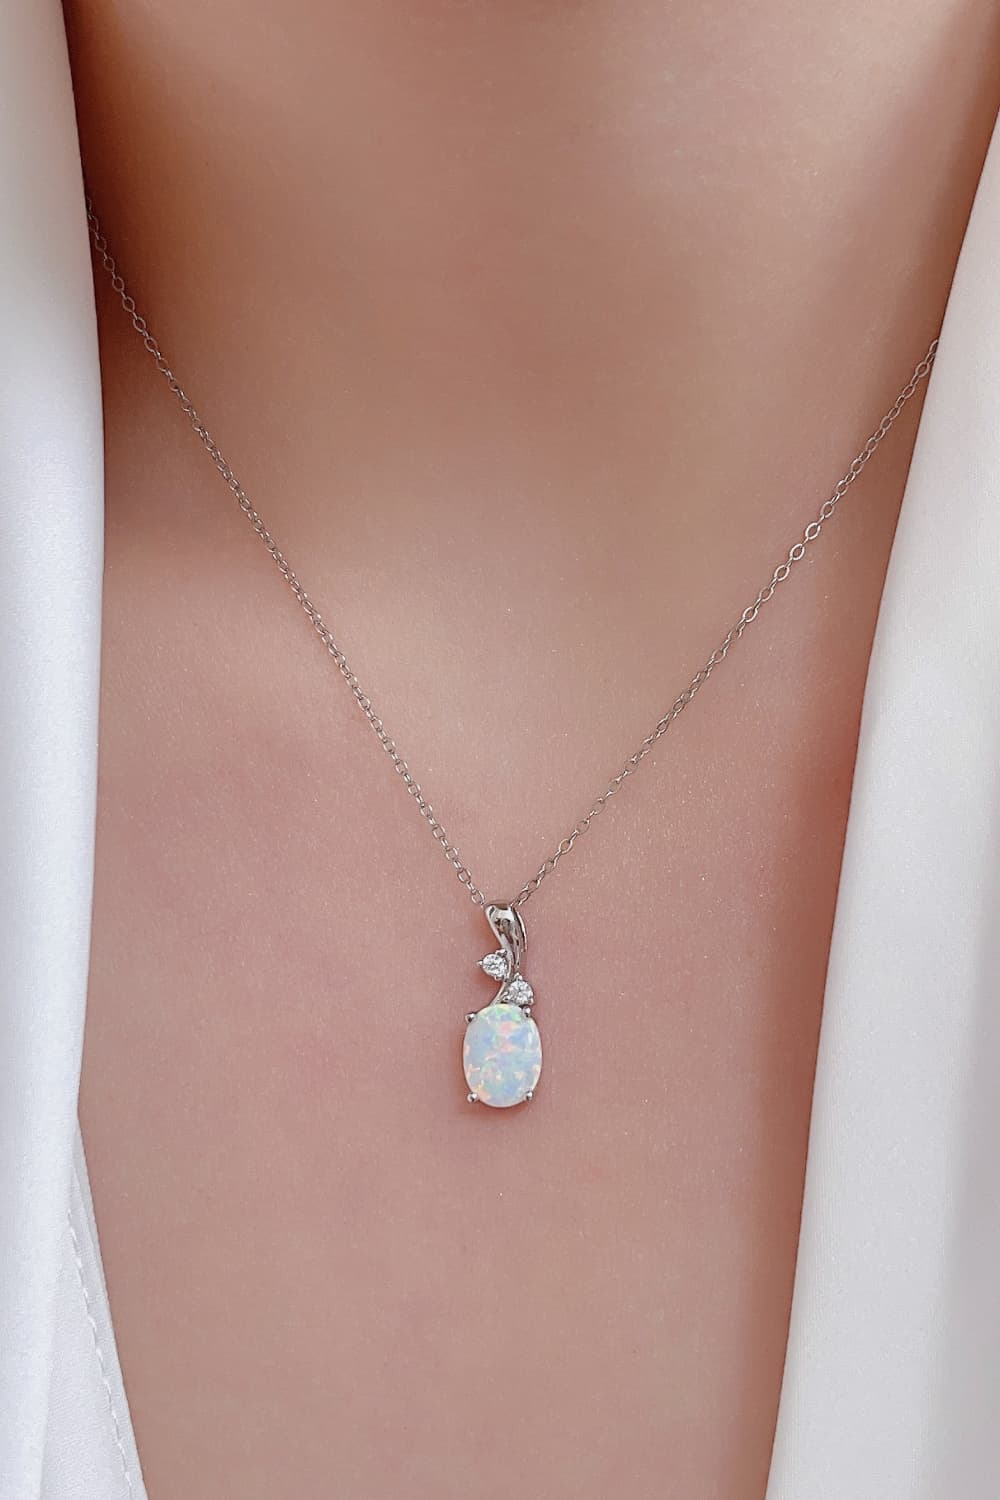 Opal Oval Pendant Chain Necklace - Necklaces - FITGGINS